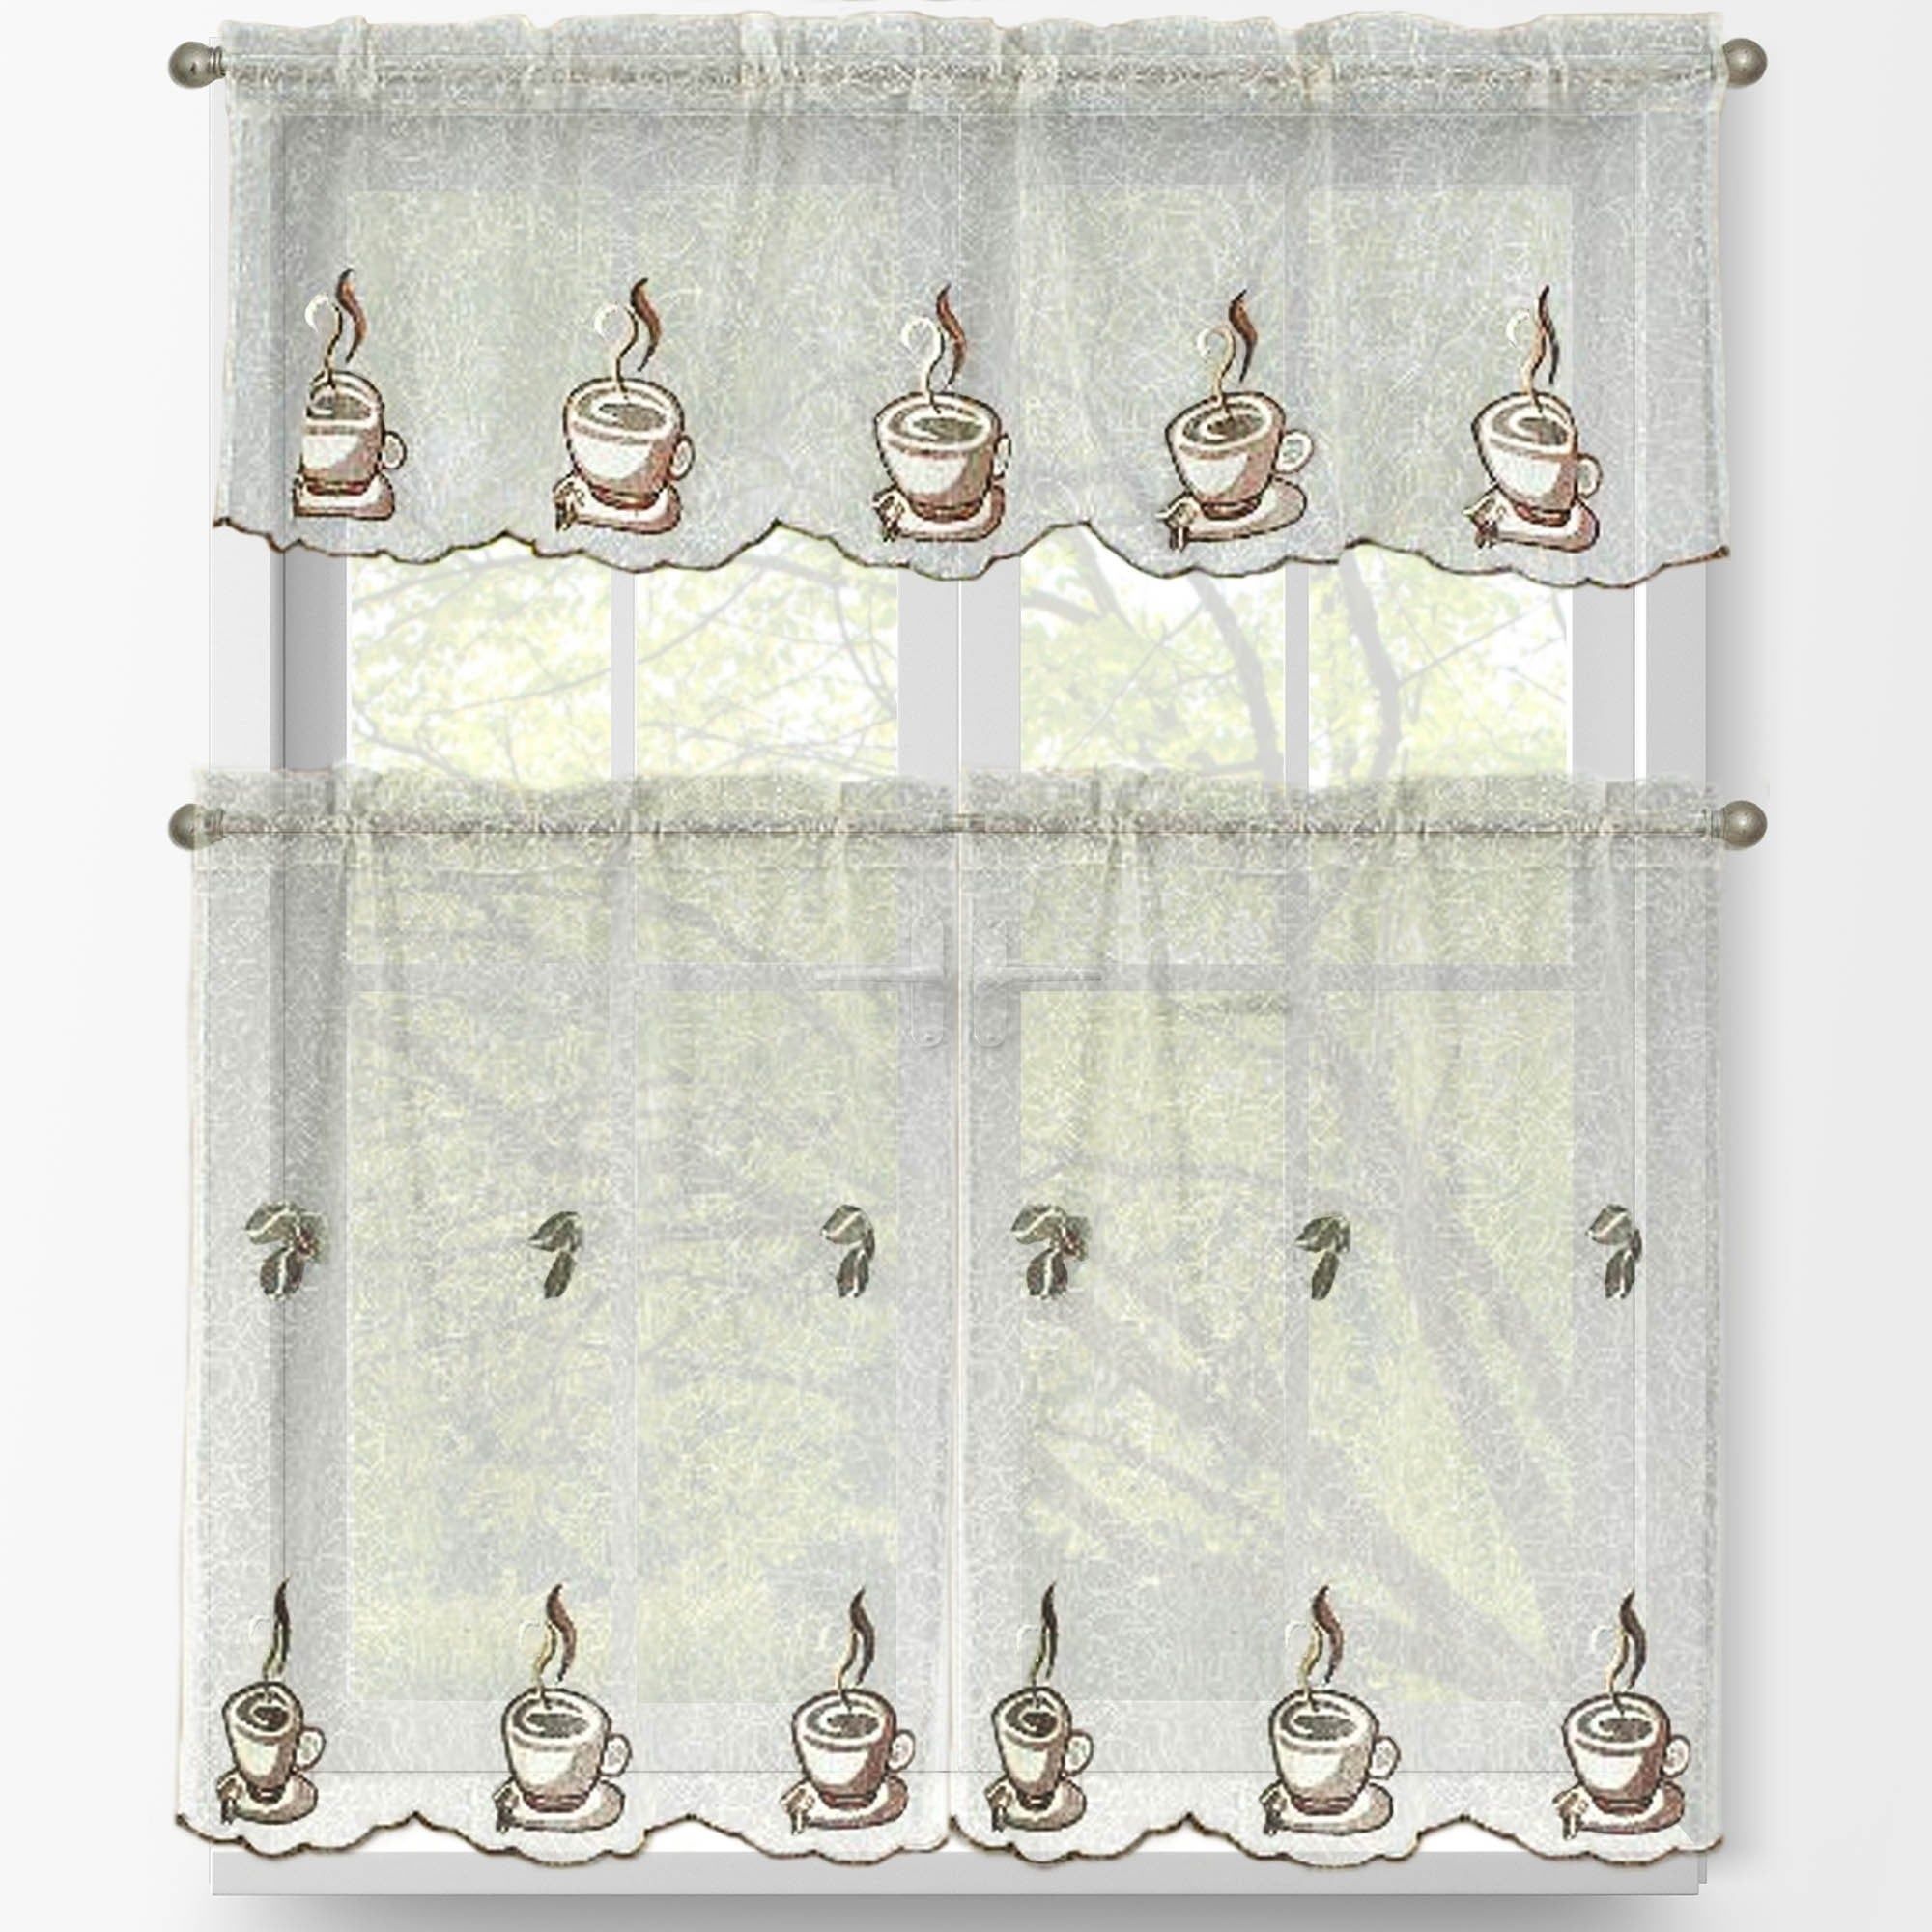 Window Elements Embroidered 3 Piece Kitchen Tier And Valance Set Inside Coffee Embroidered Kitchen Curtain Tier Sets (View 16 of 20)